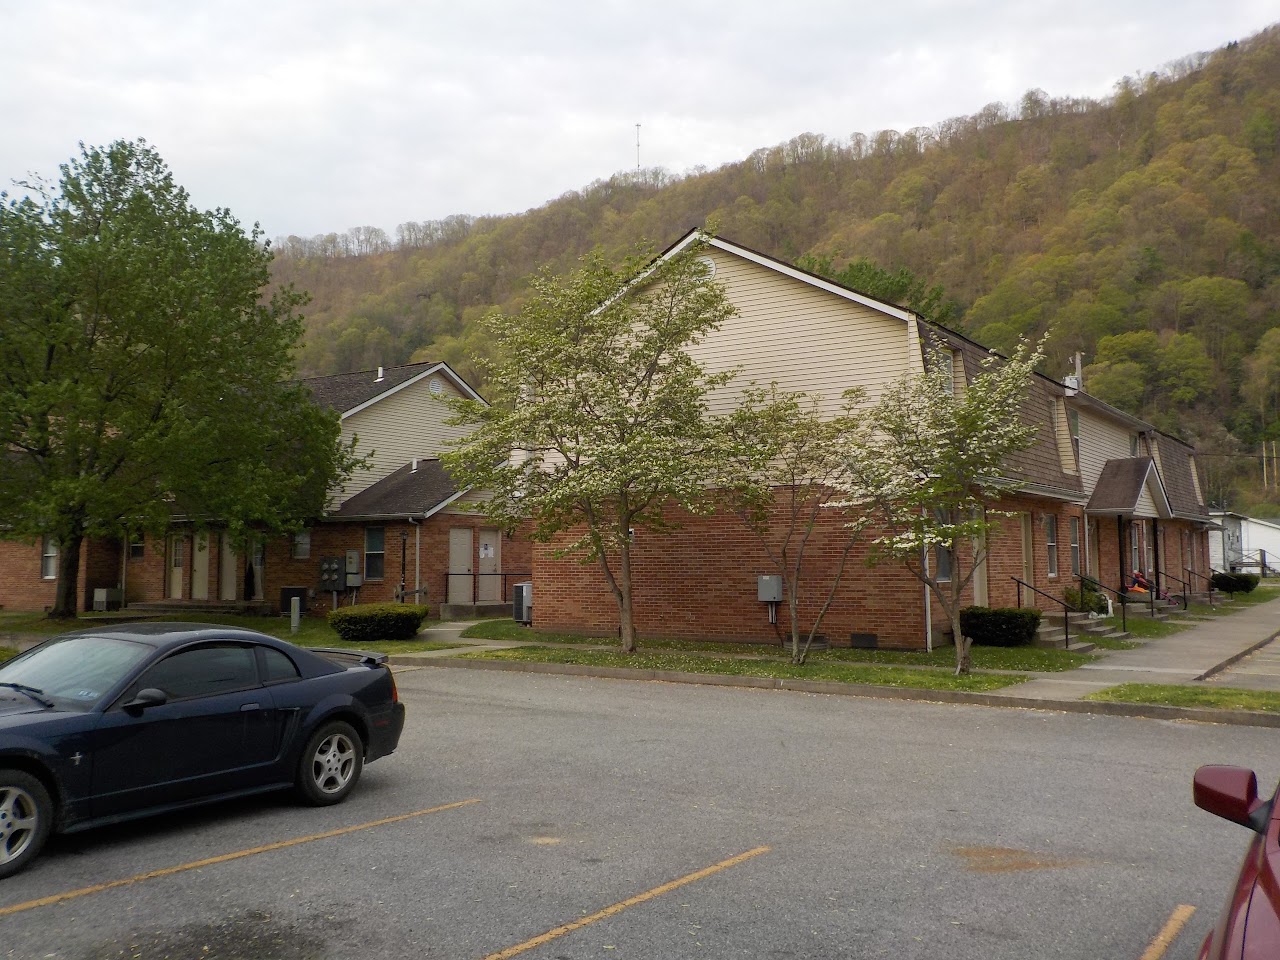 Photo of AMOS E LANDRUM. Affordable housing located at PO BOX 638 SMITHERS, WV 25186